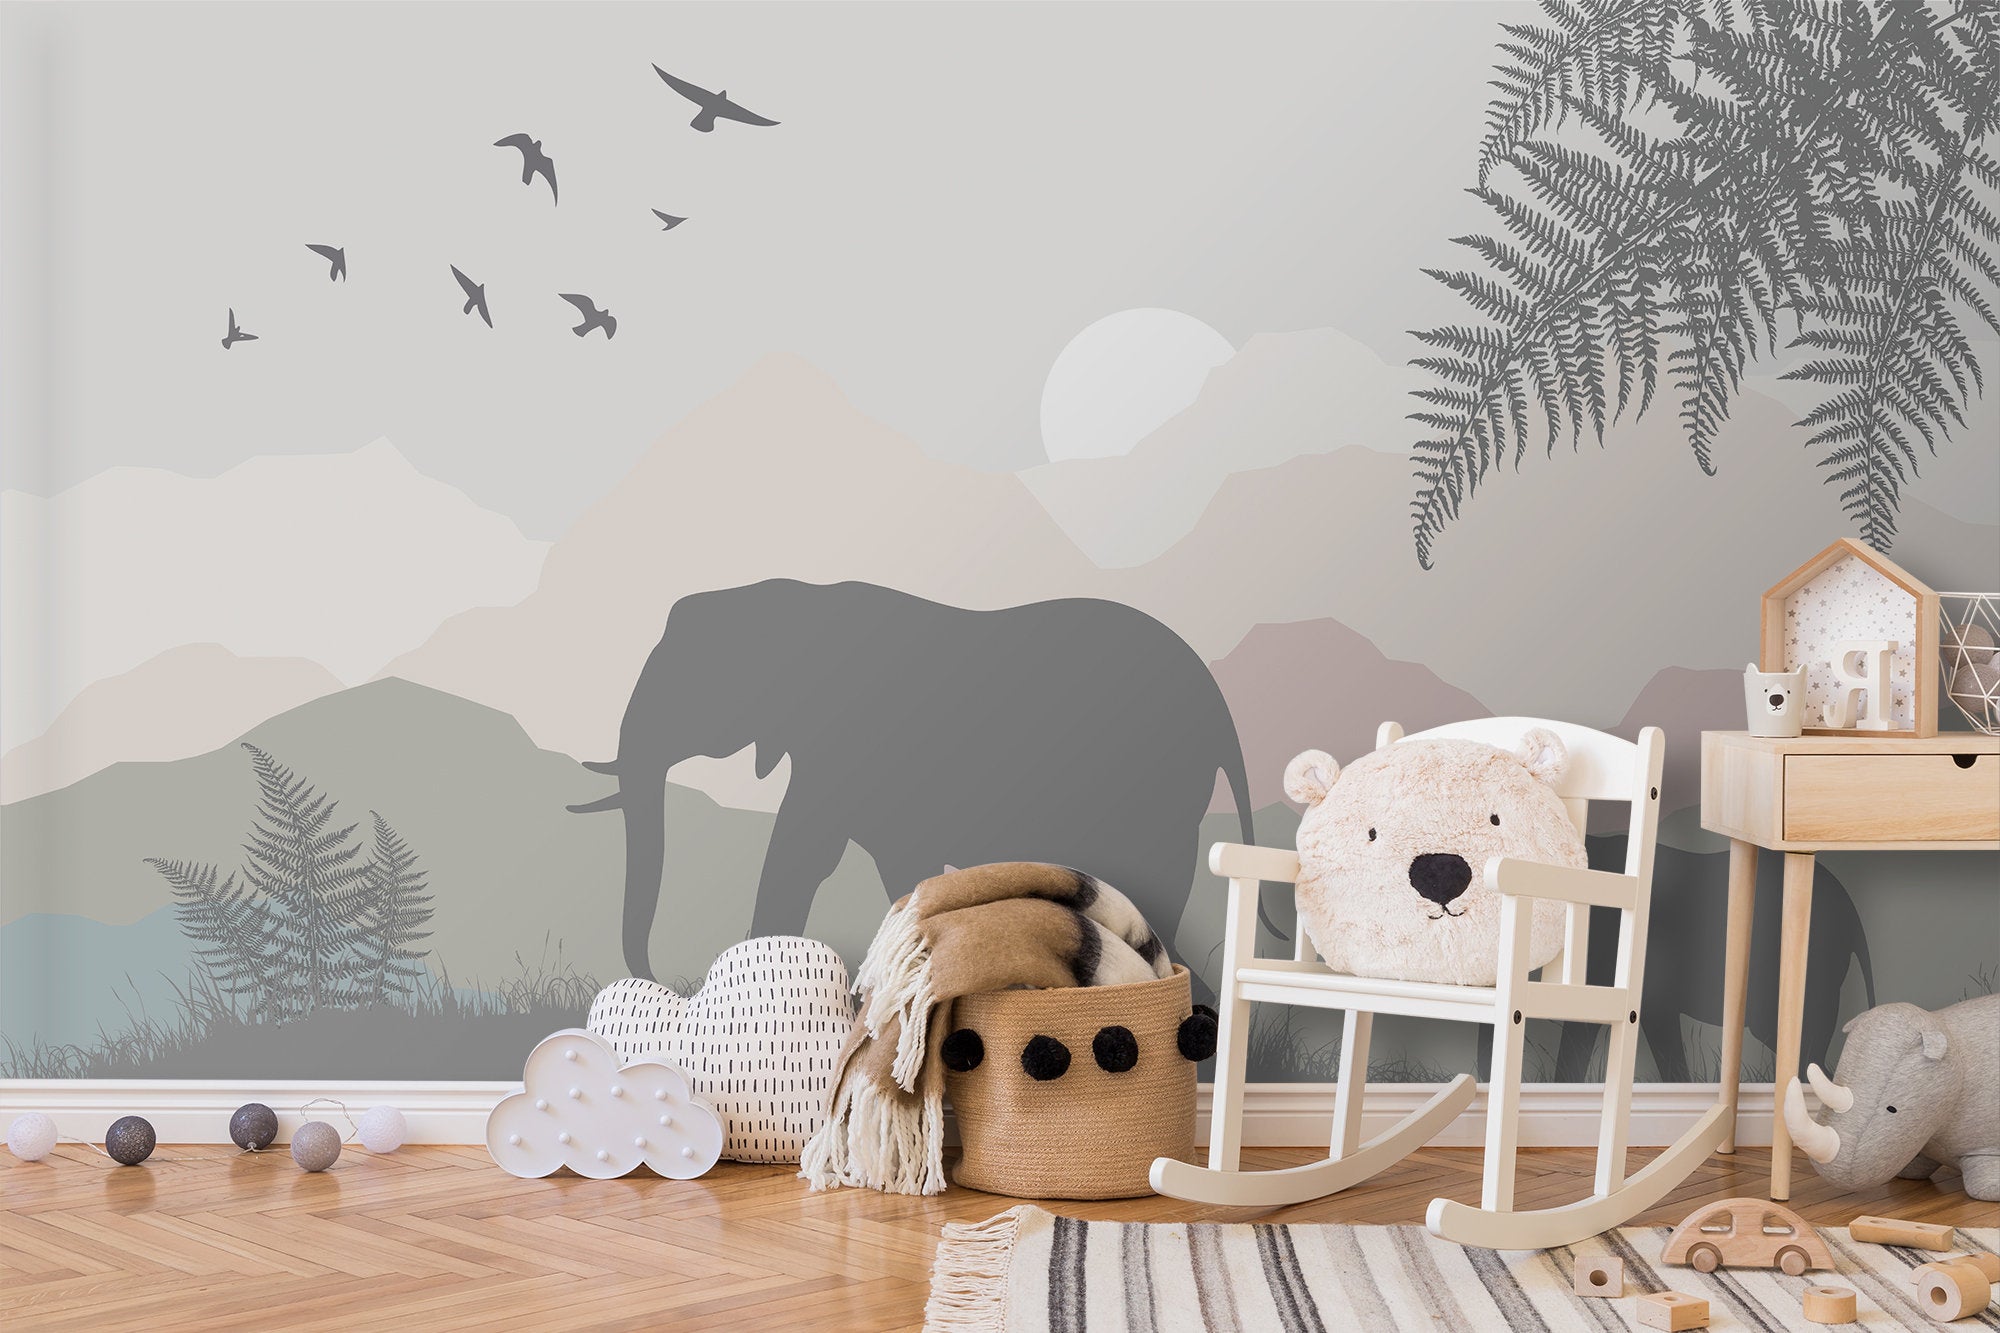 Abstract Elephant Family Mountains Wallpaper Self Adhesive Peel and Stick Wall Sticker Wall Decoration Minimalistic Scandinavian Removable